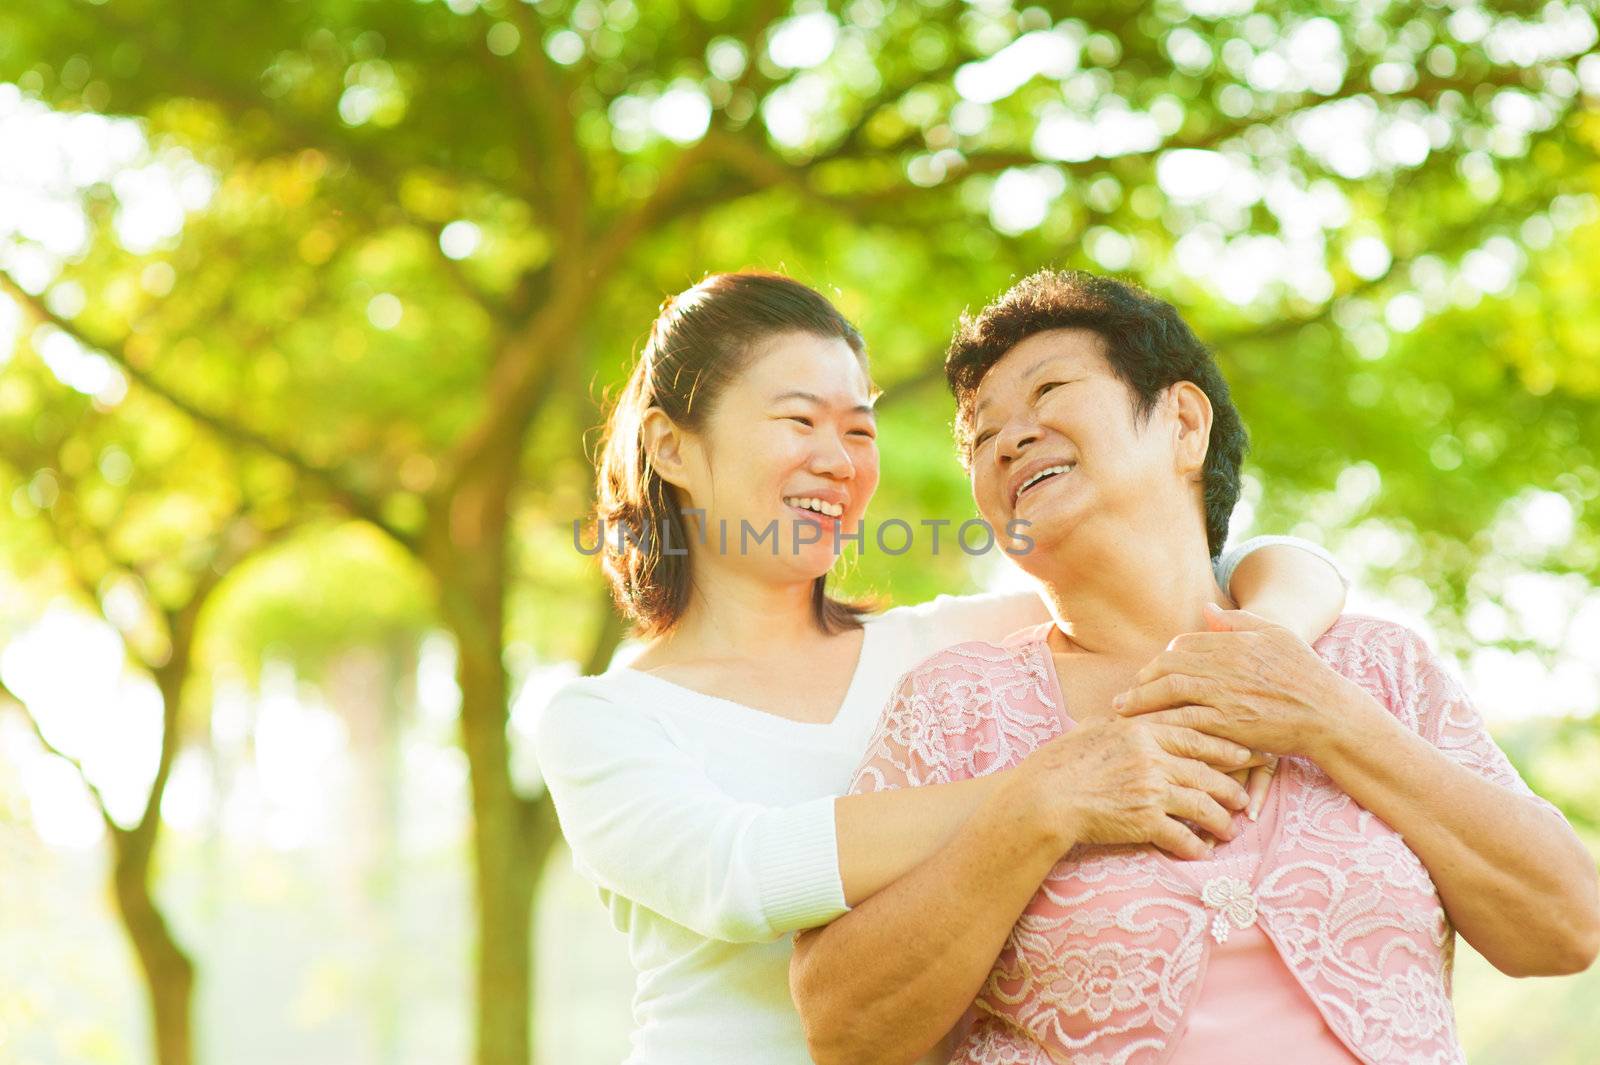 Senior mother and daughter having fun time at outdoor